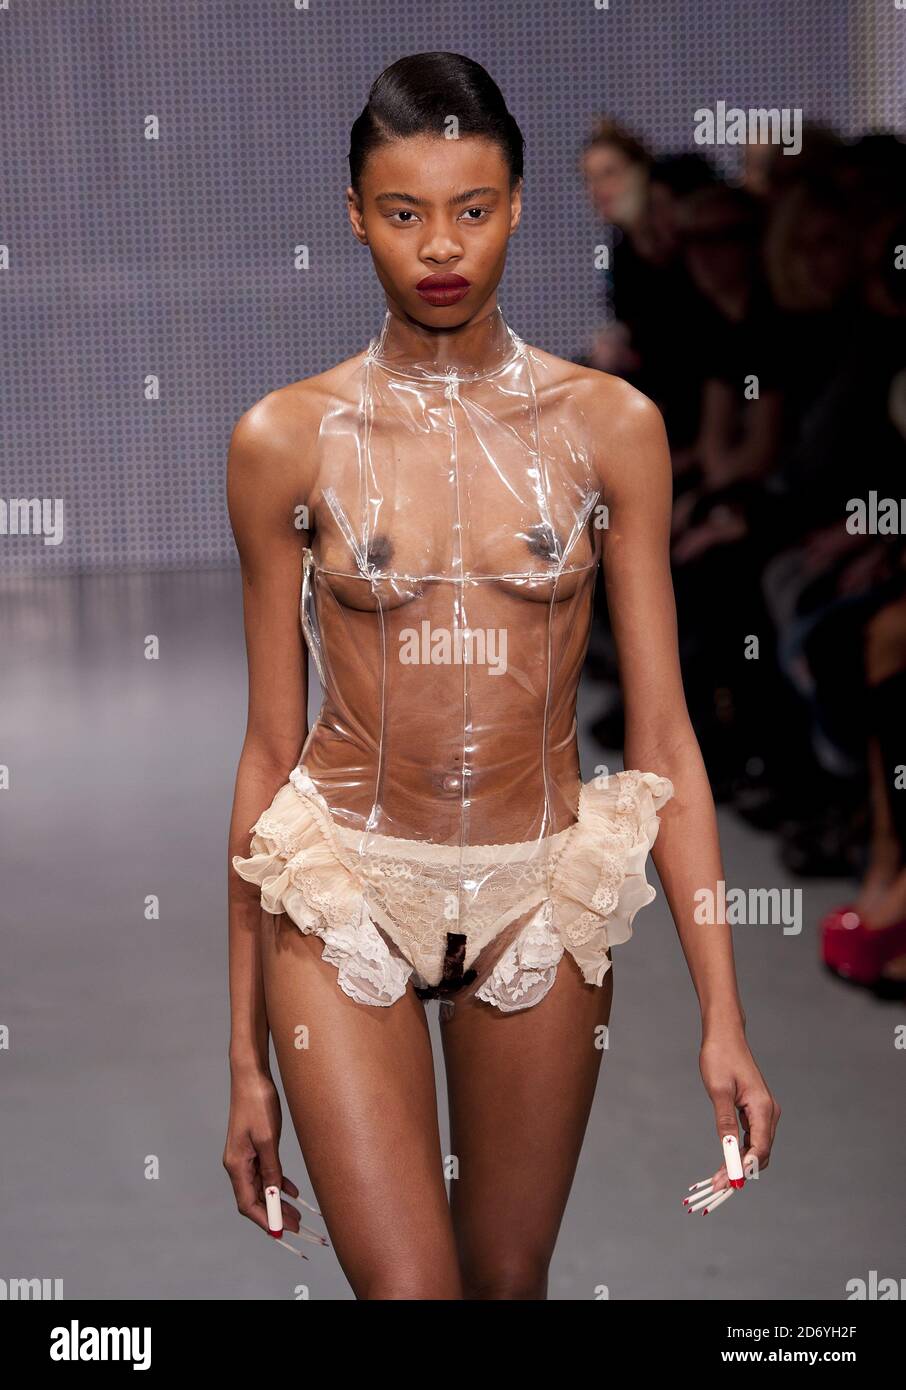 Naked in fashion show